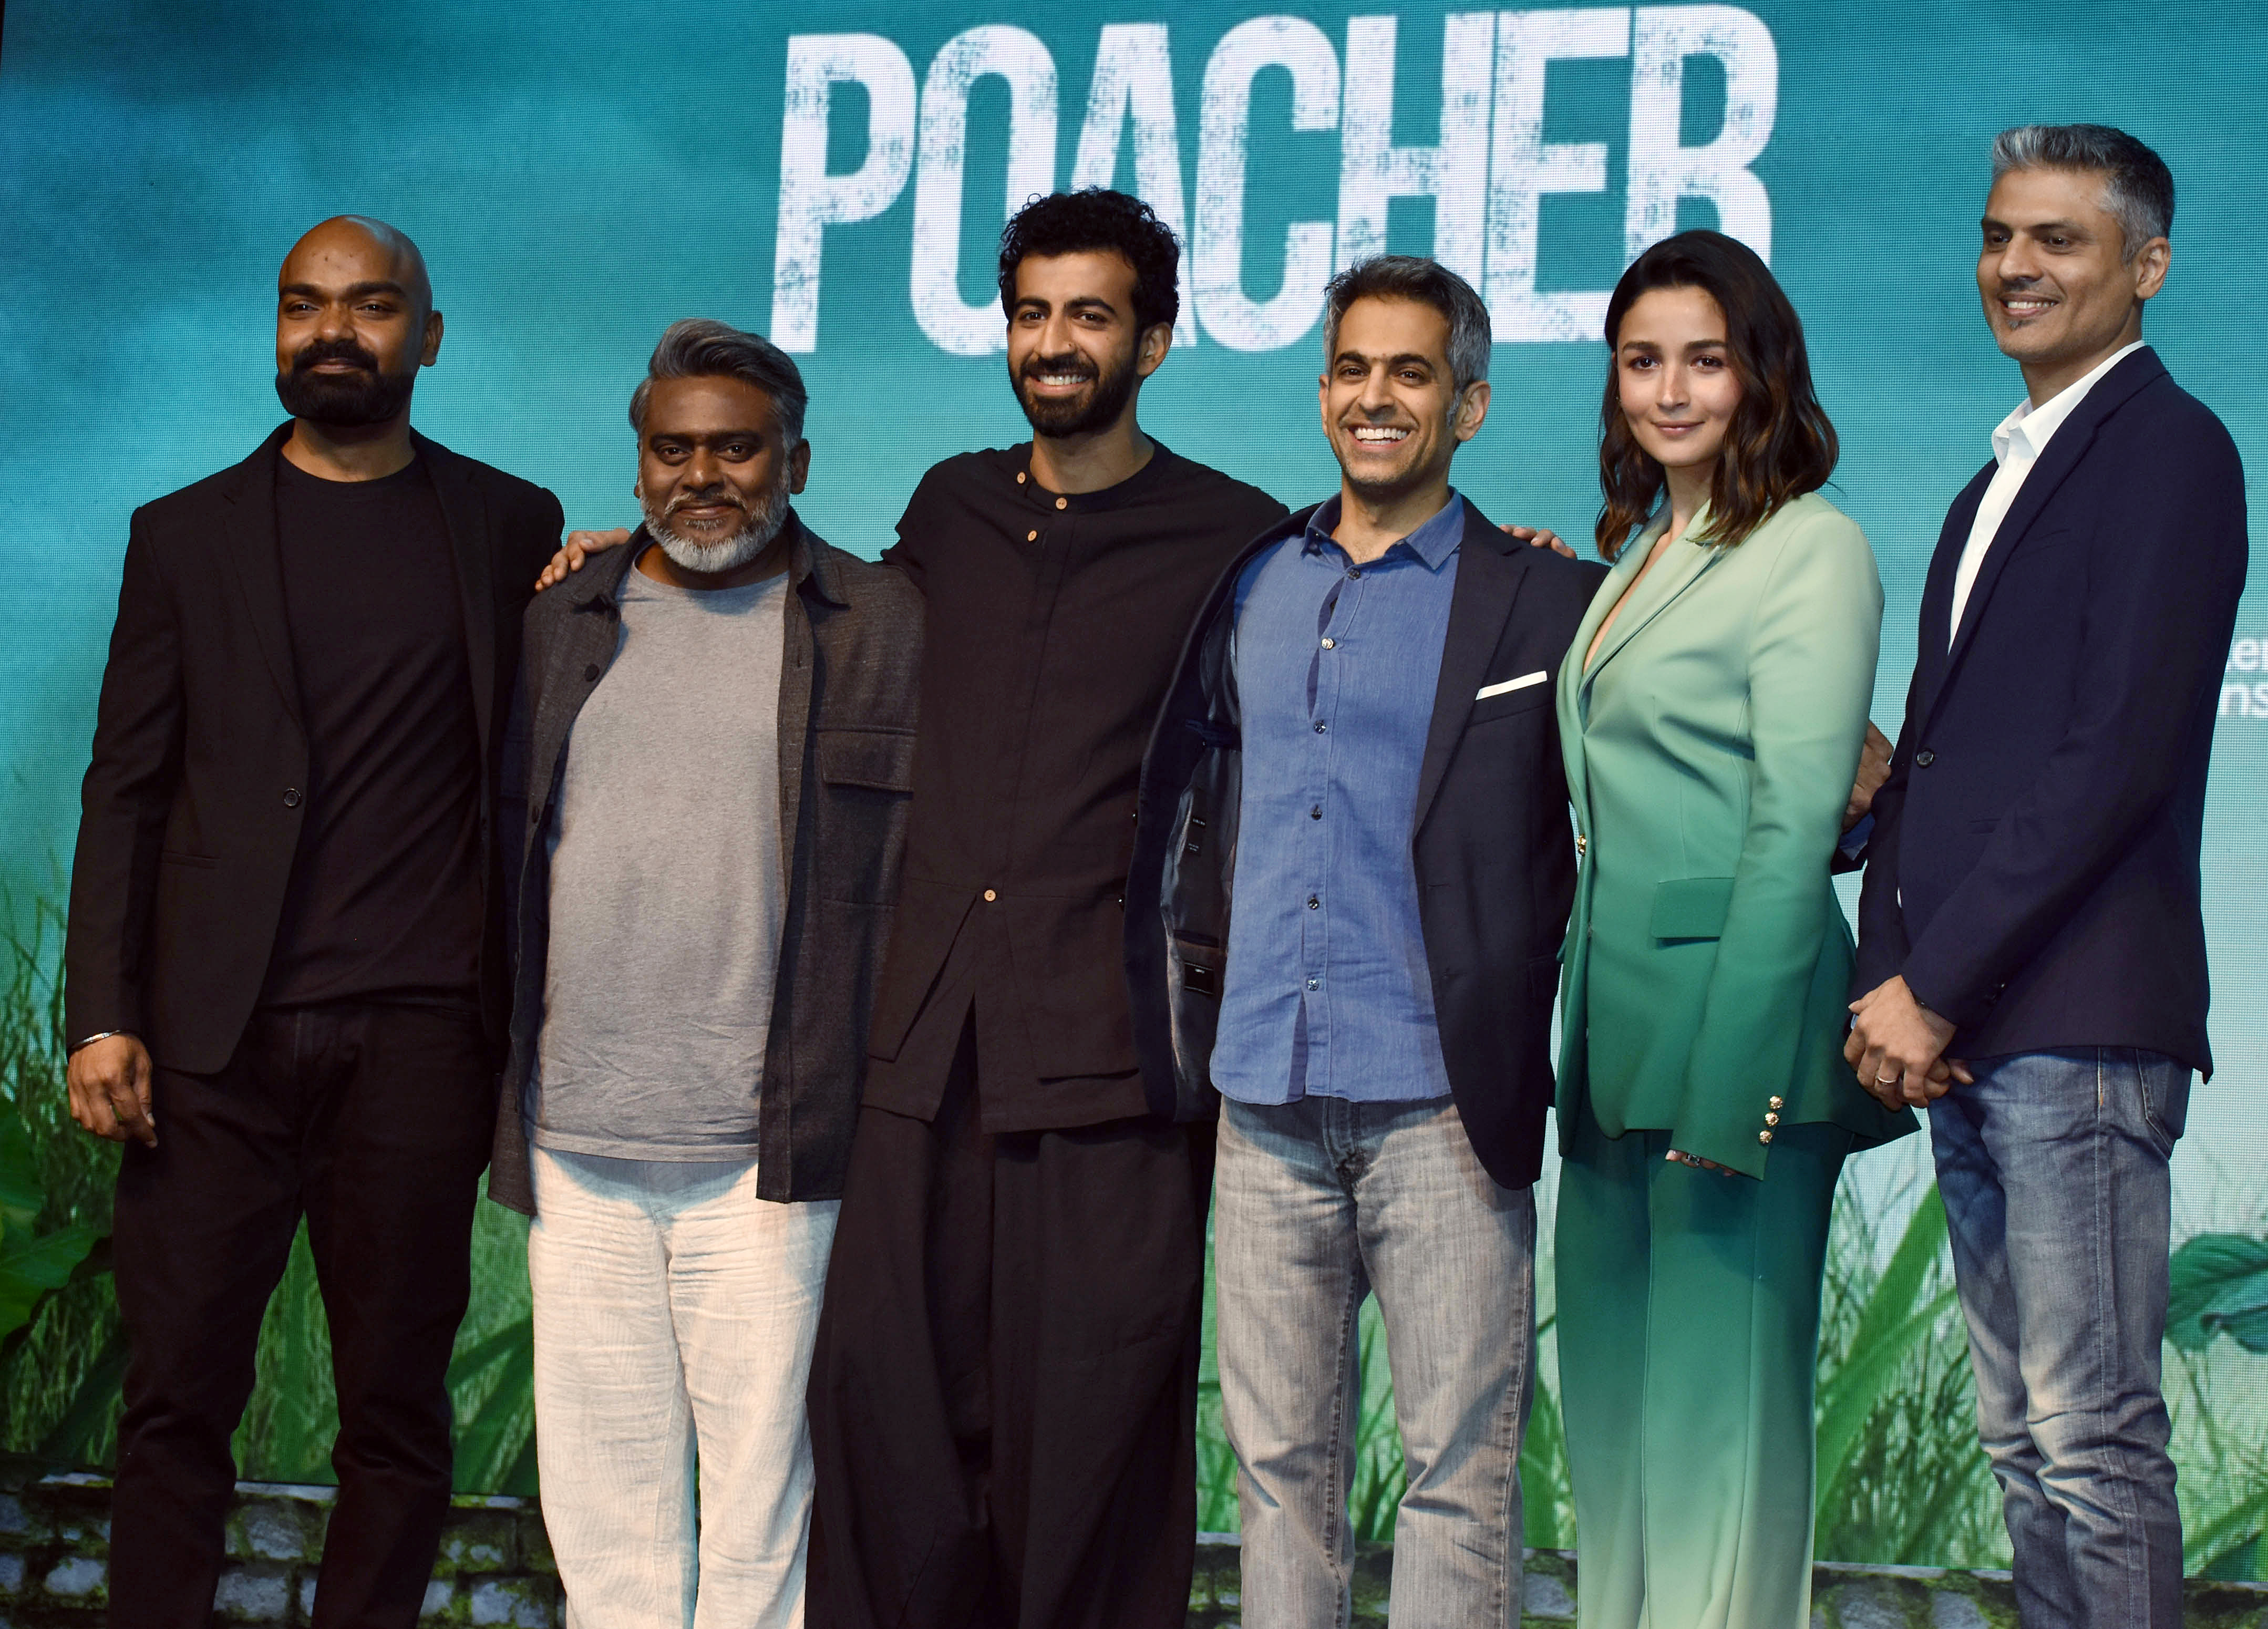 Poacher: Coming soon on OTT, a unique series based on real-life events and characters